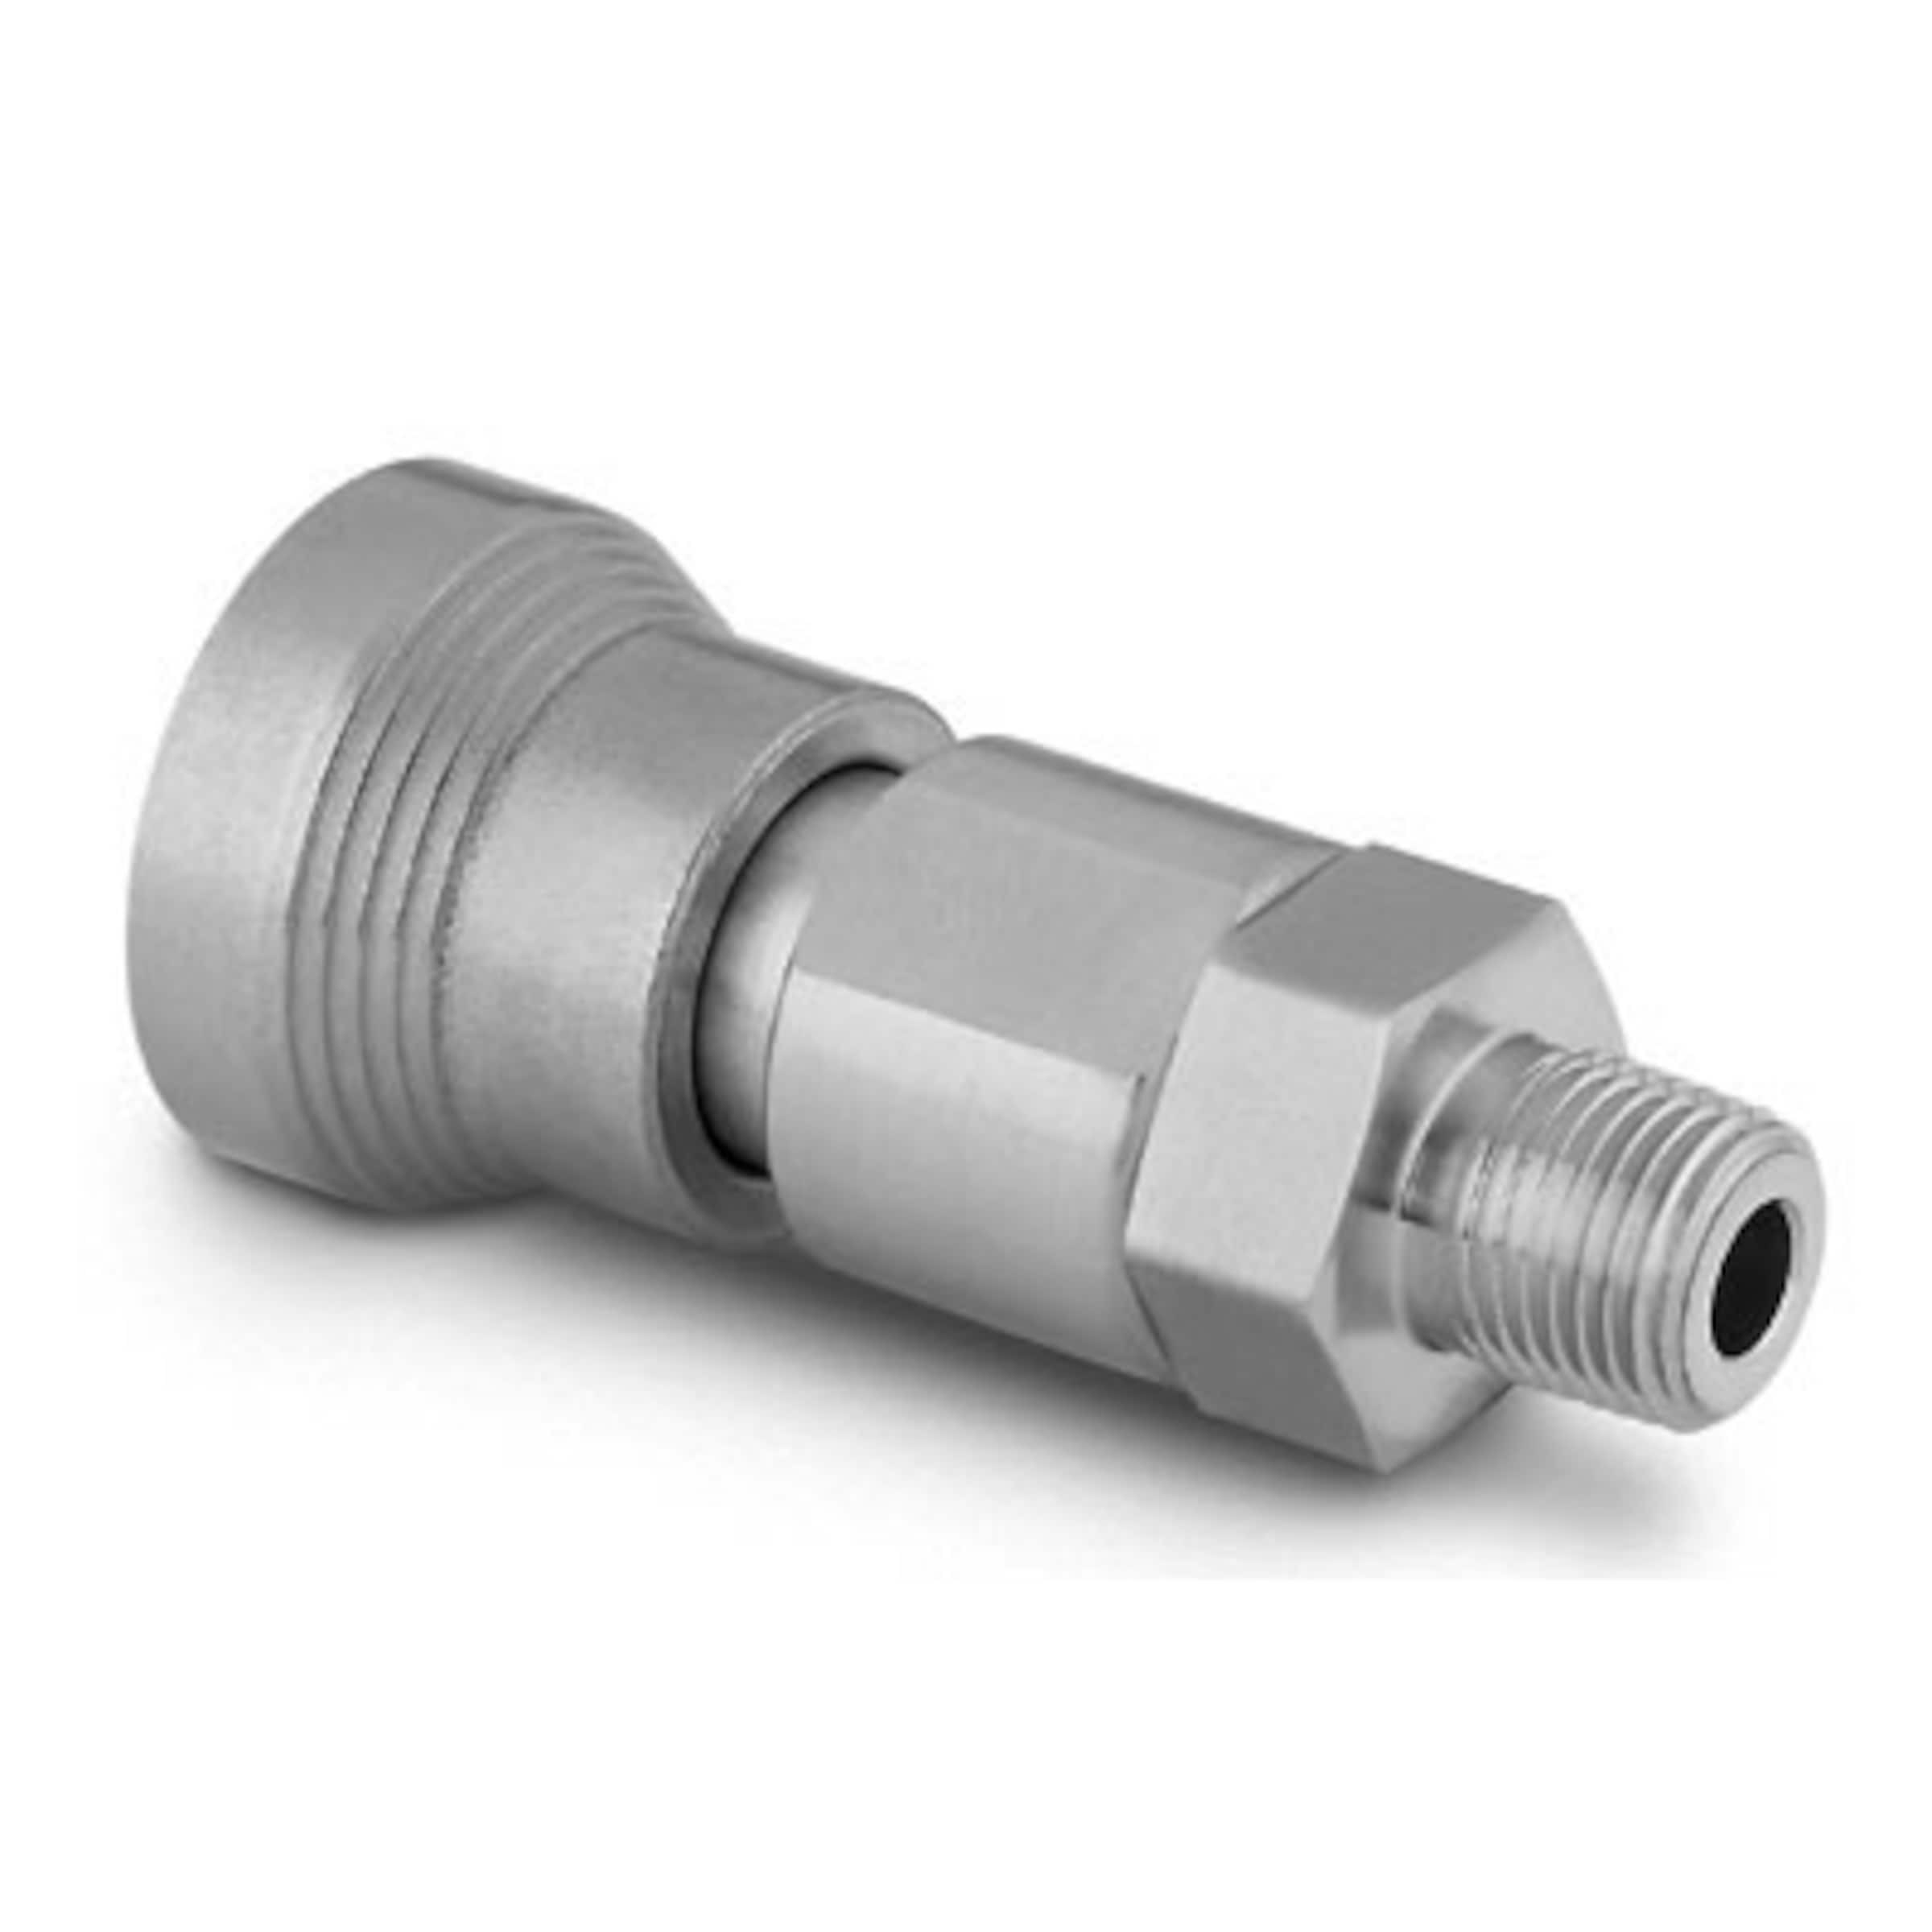 Details about  / SWAGELOK QC6 316-SS ¼/" NPT QUICK CONNECT HYDRAULIC COUPLER BODY